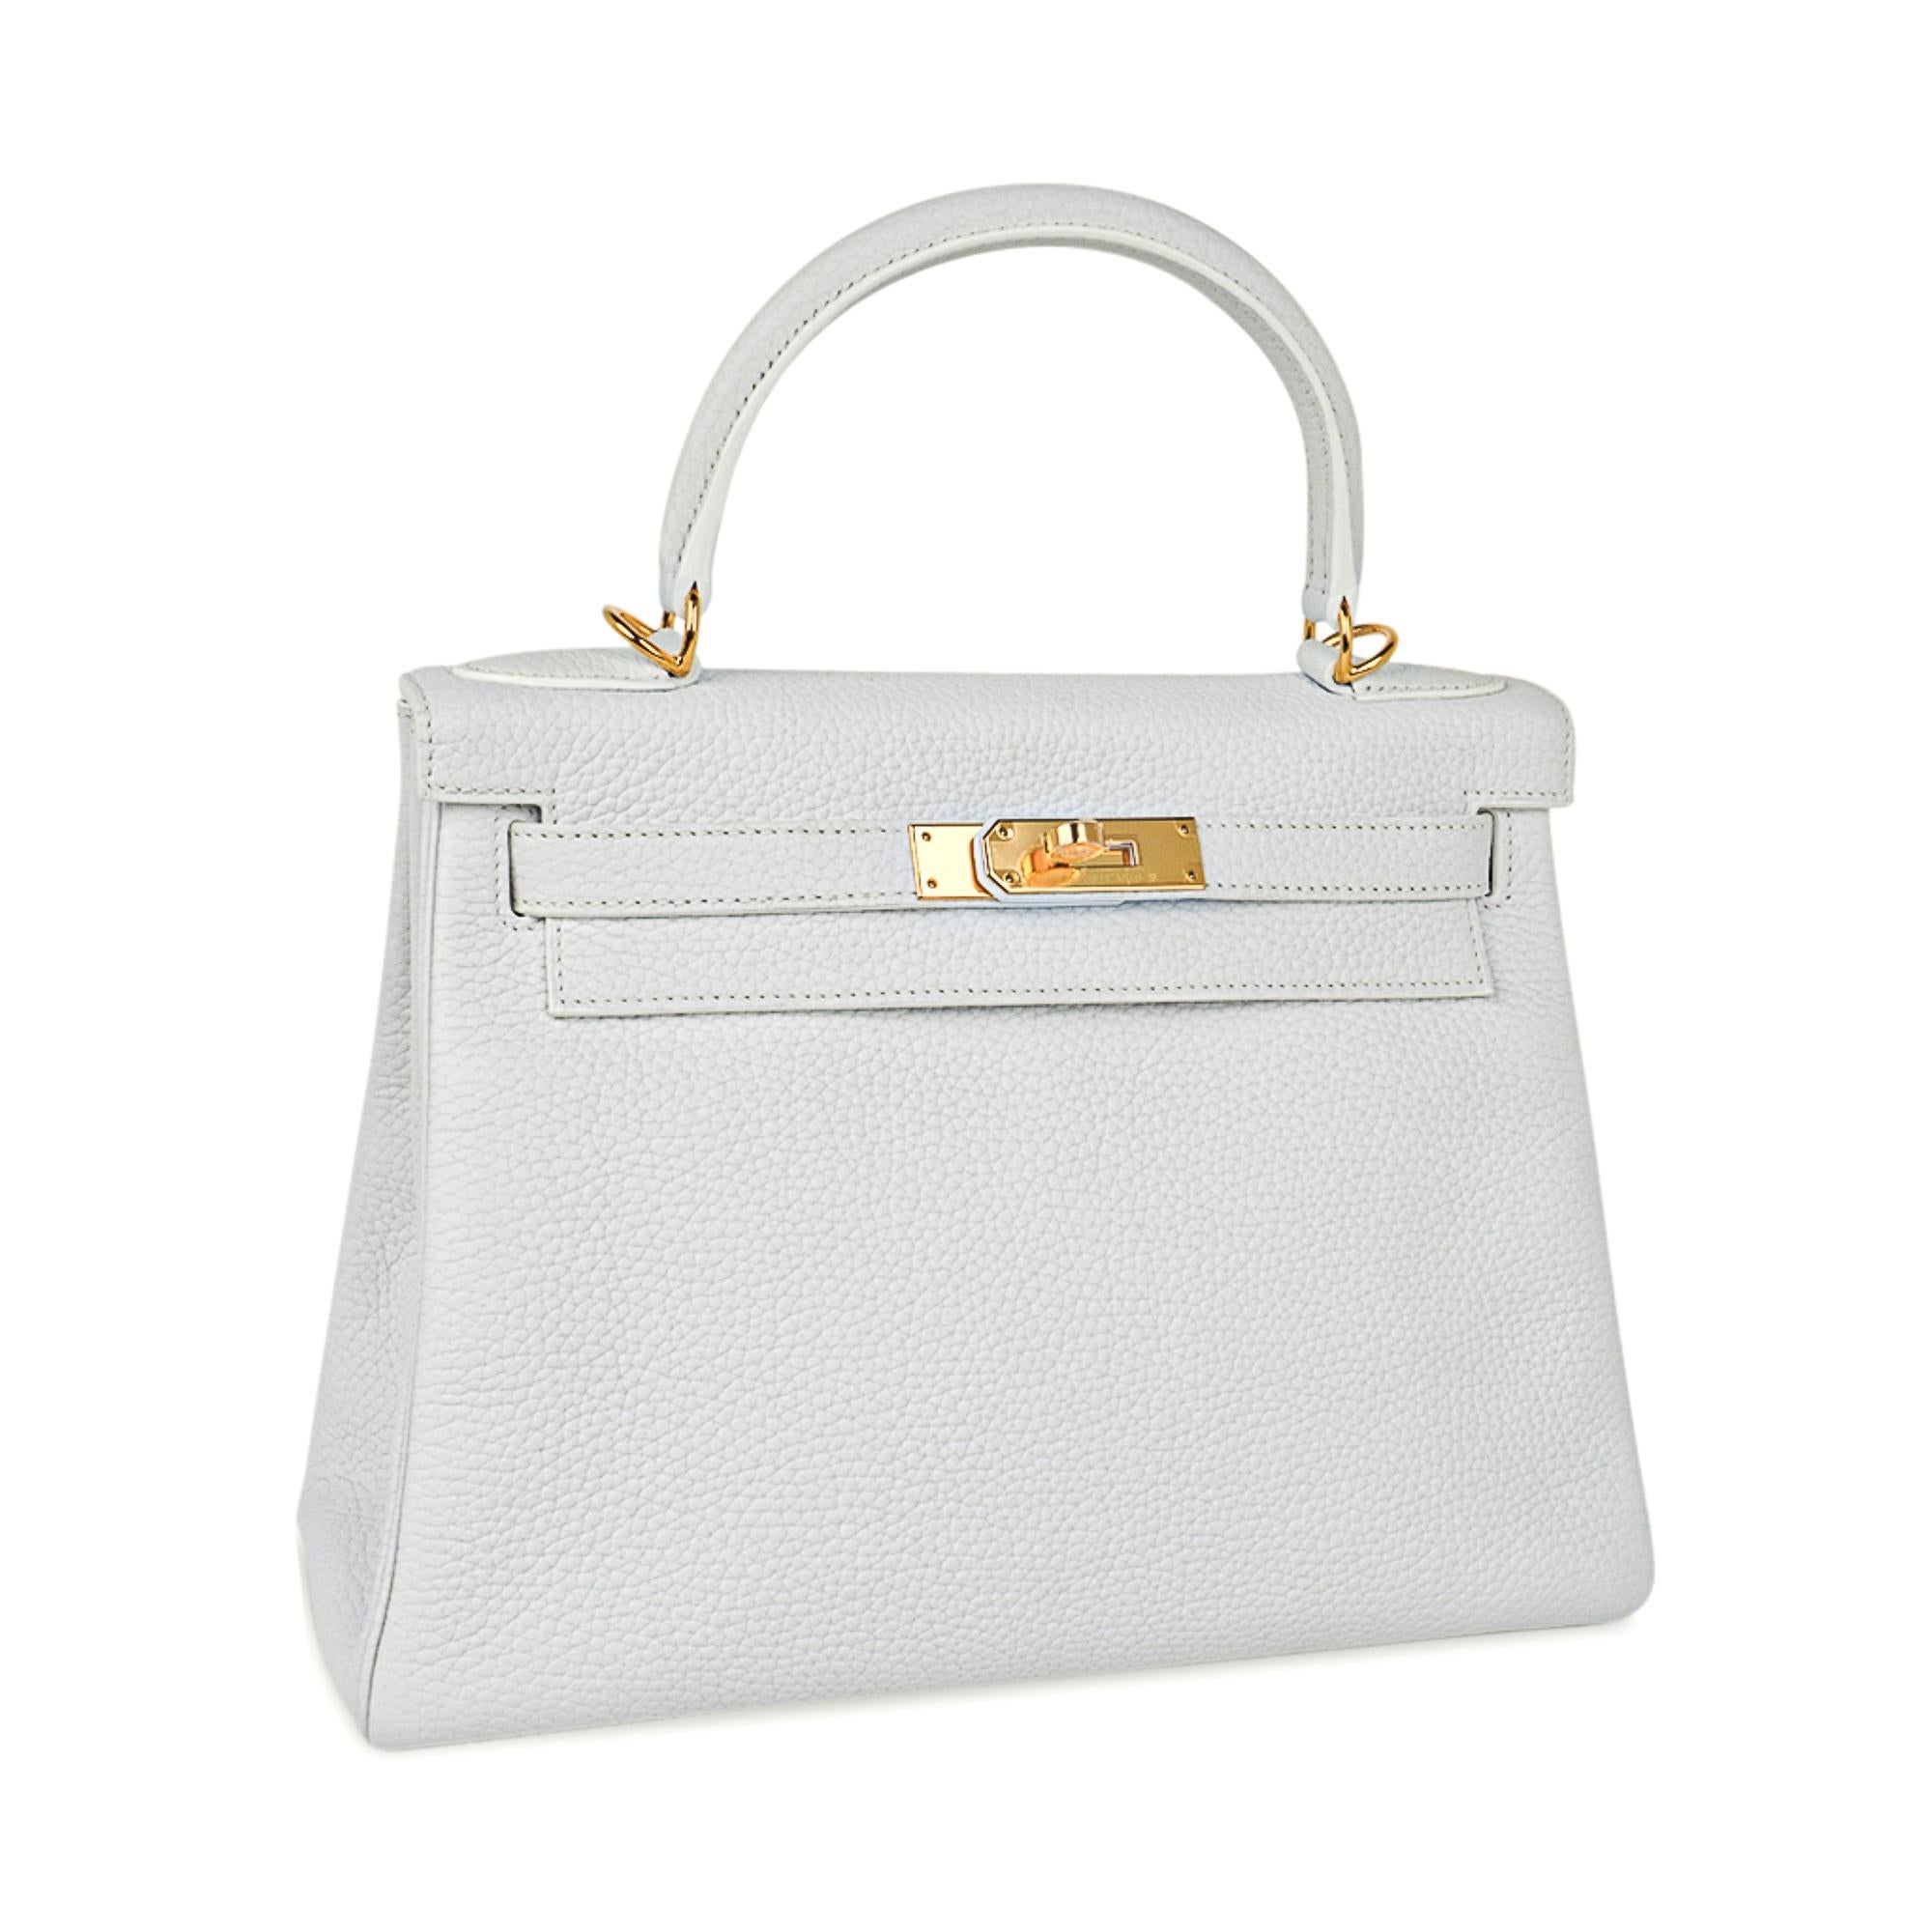 Mightychic offers an Hermes Kelly 28 Retourne bag featured in limited edition White.
This snow white Hermes Kelly bag gleams with gold hardware.
Clemence leather.
White is the most rare leather colour offered by Hermes.
Divine size for day to